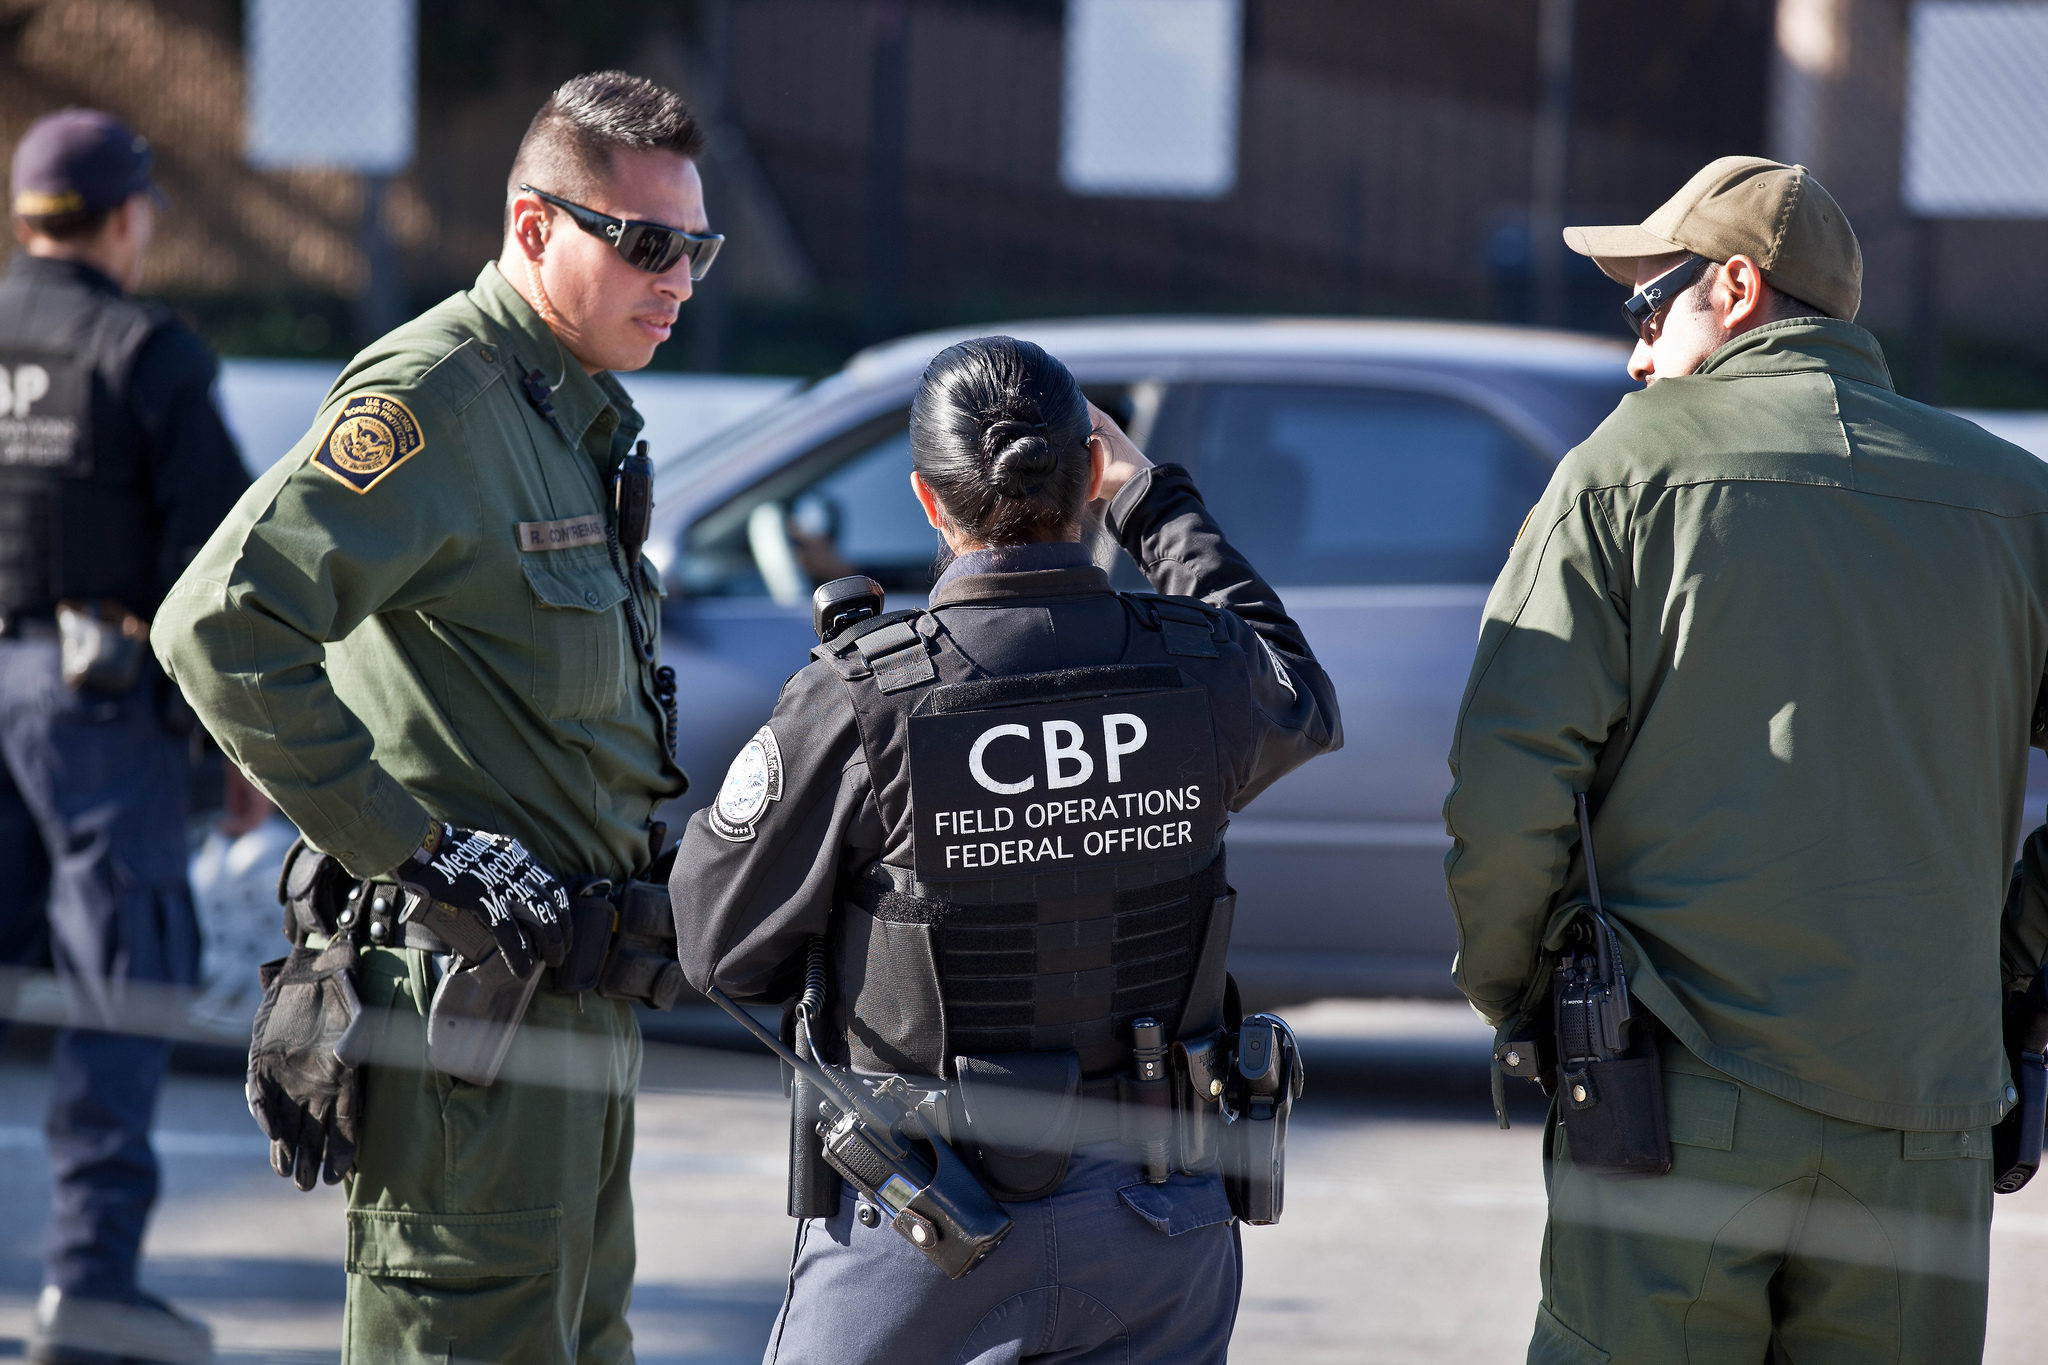 High Profile Cases Highlight Border Patrol Abuses and Need for Systemic Change